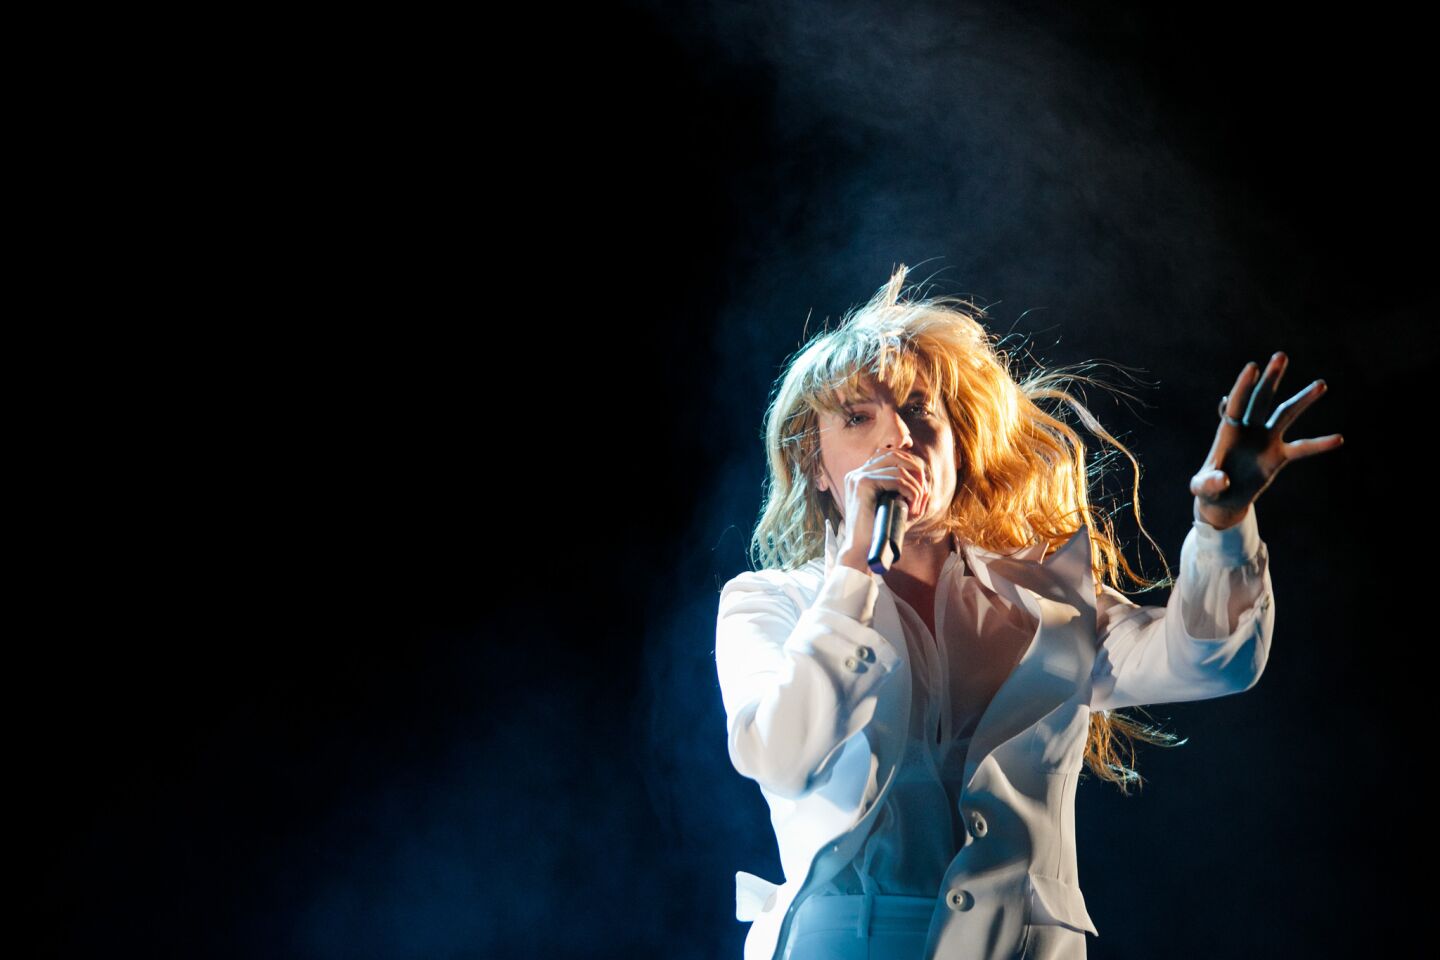 Florence + The Machine perform during the Coachella Valley Music and Arts Festival on April 12.